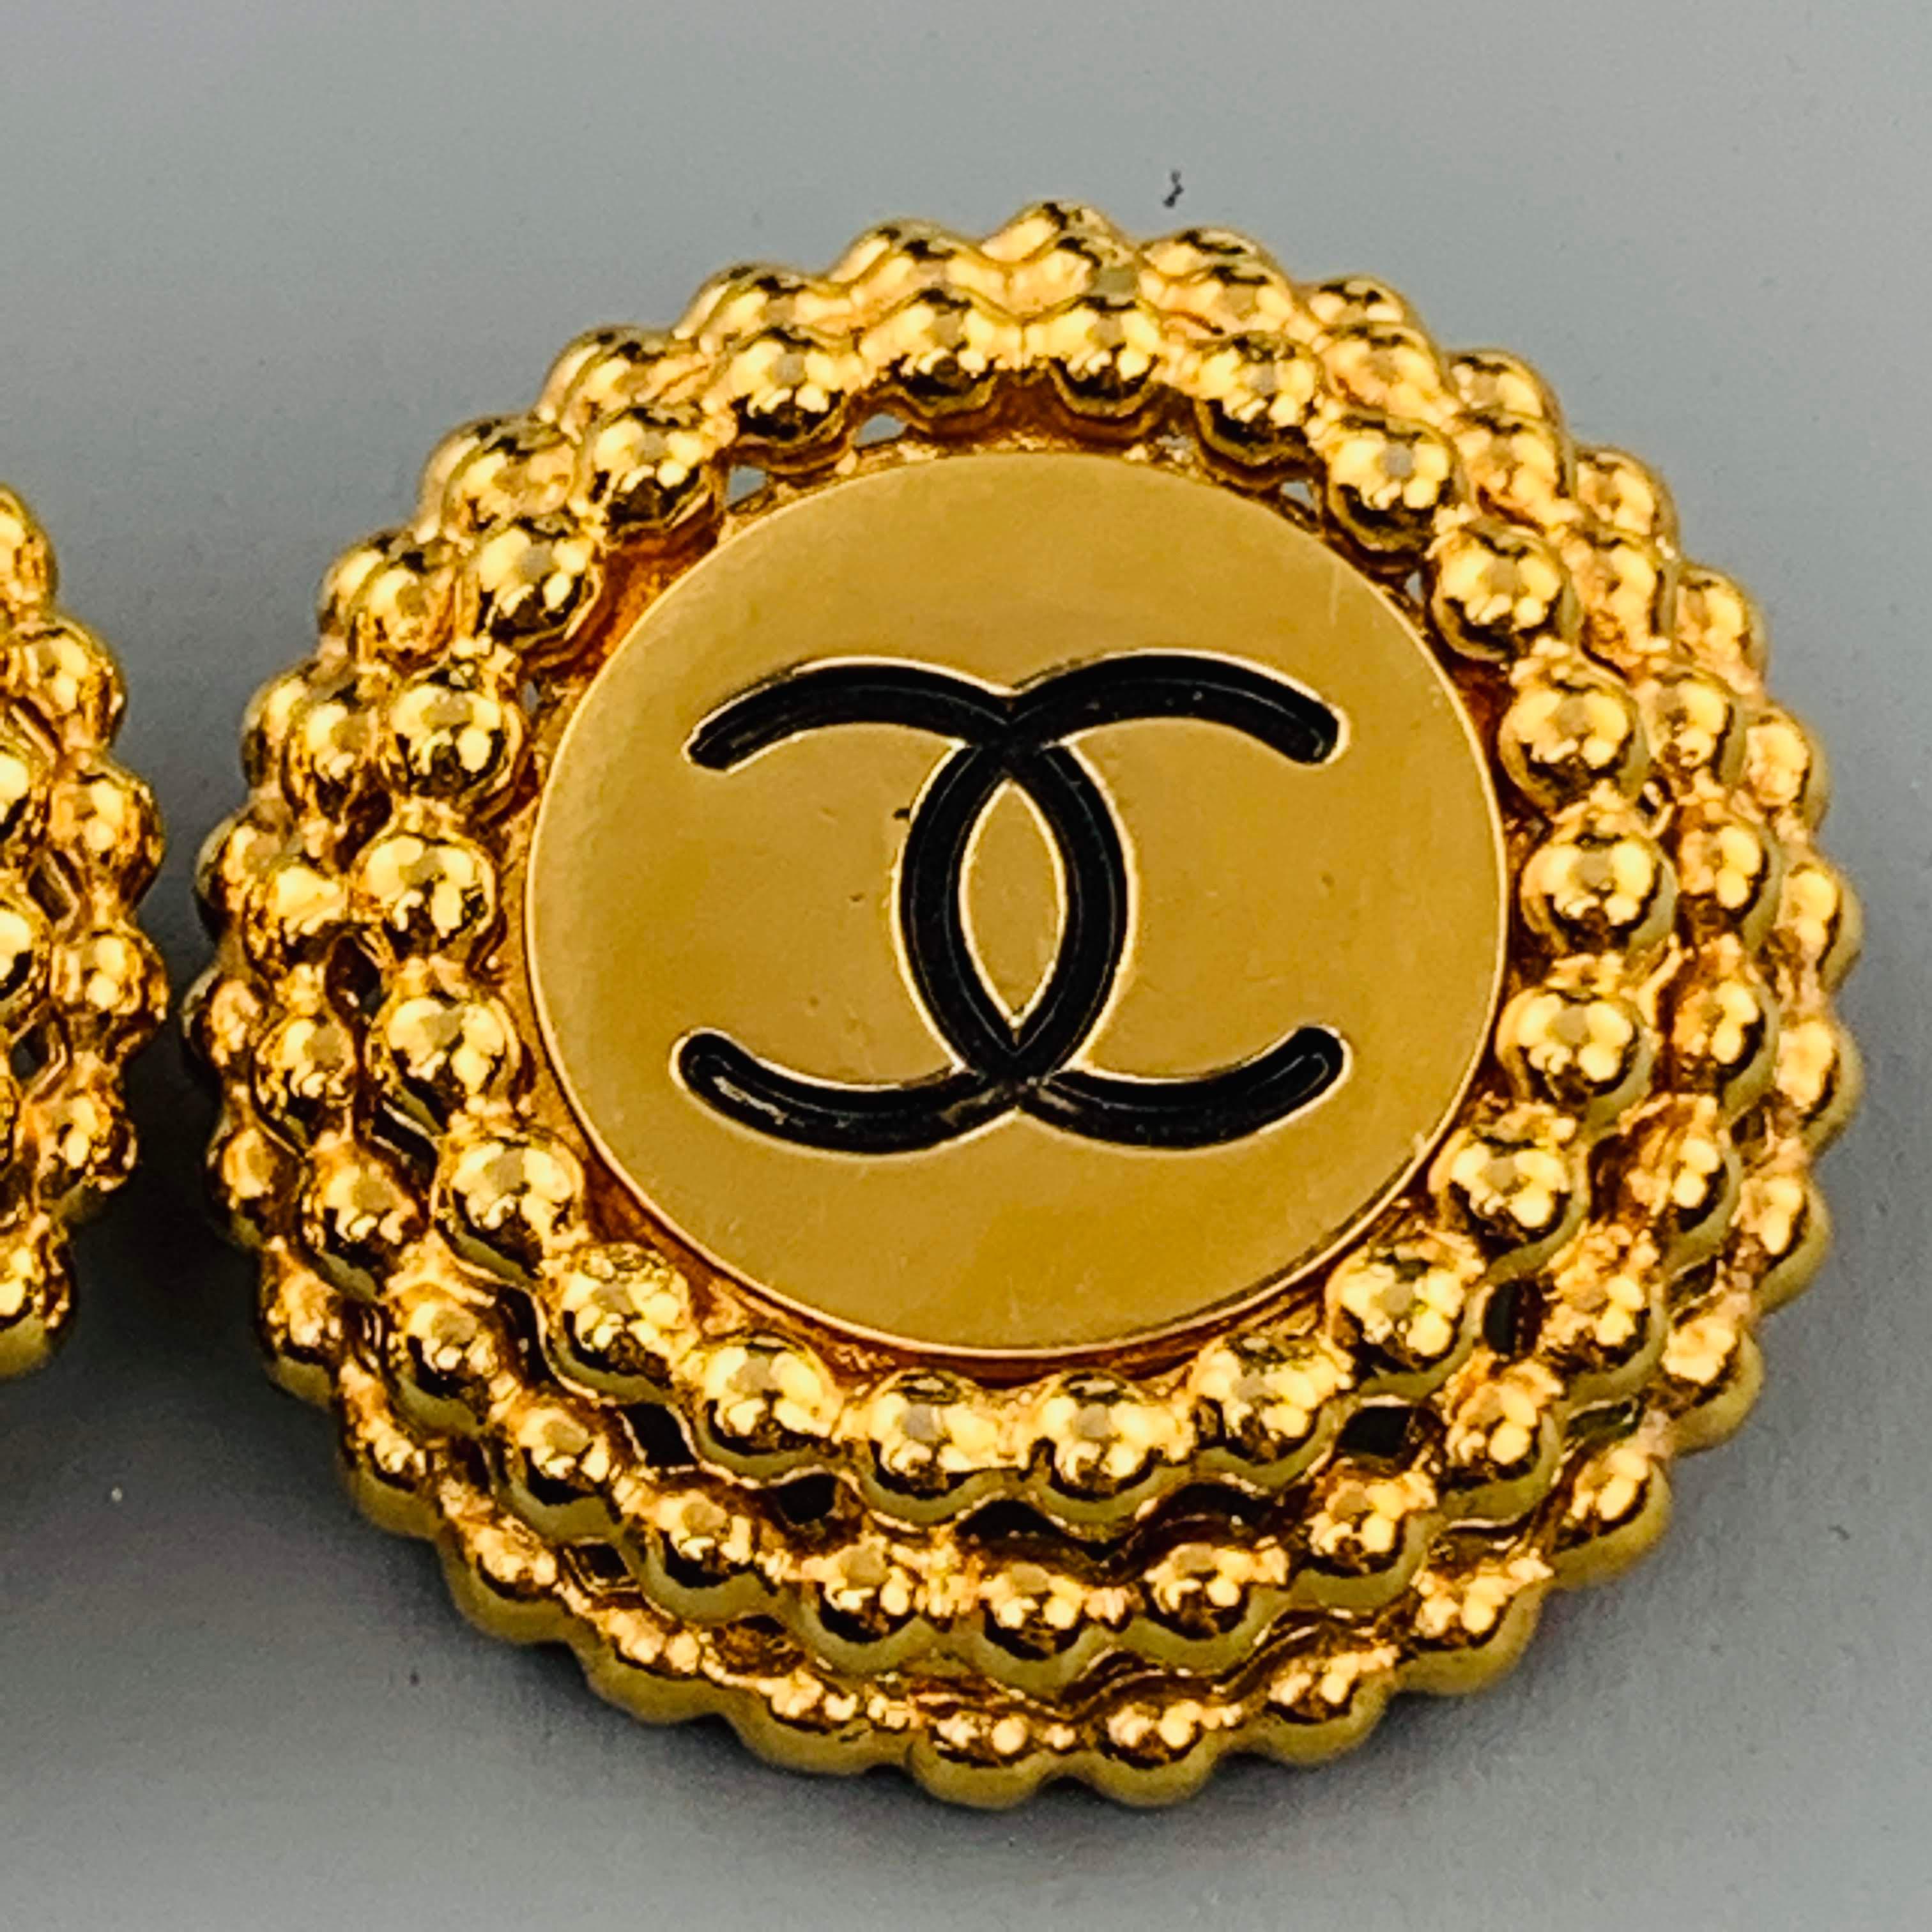 Vintage CHANEL (Circa 1954-1971) round clip on earrings come in yellow gold tone metal with a textured boarder and black CC logo center.
 
Excellent Pre-Owned Condition.
 
3.5 x 3.5 cm.